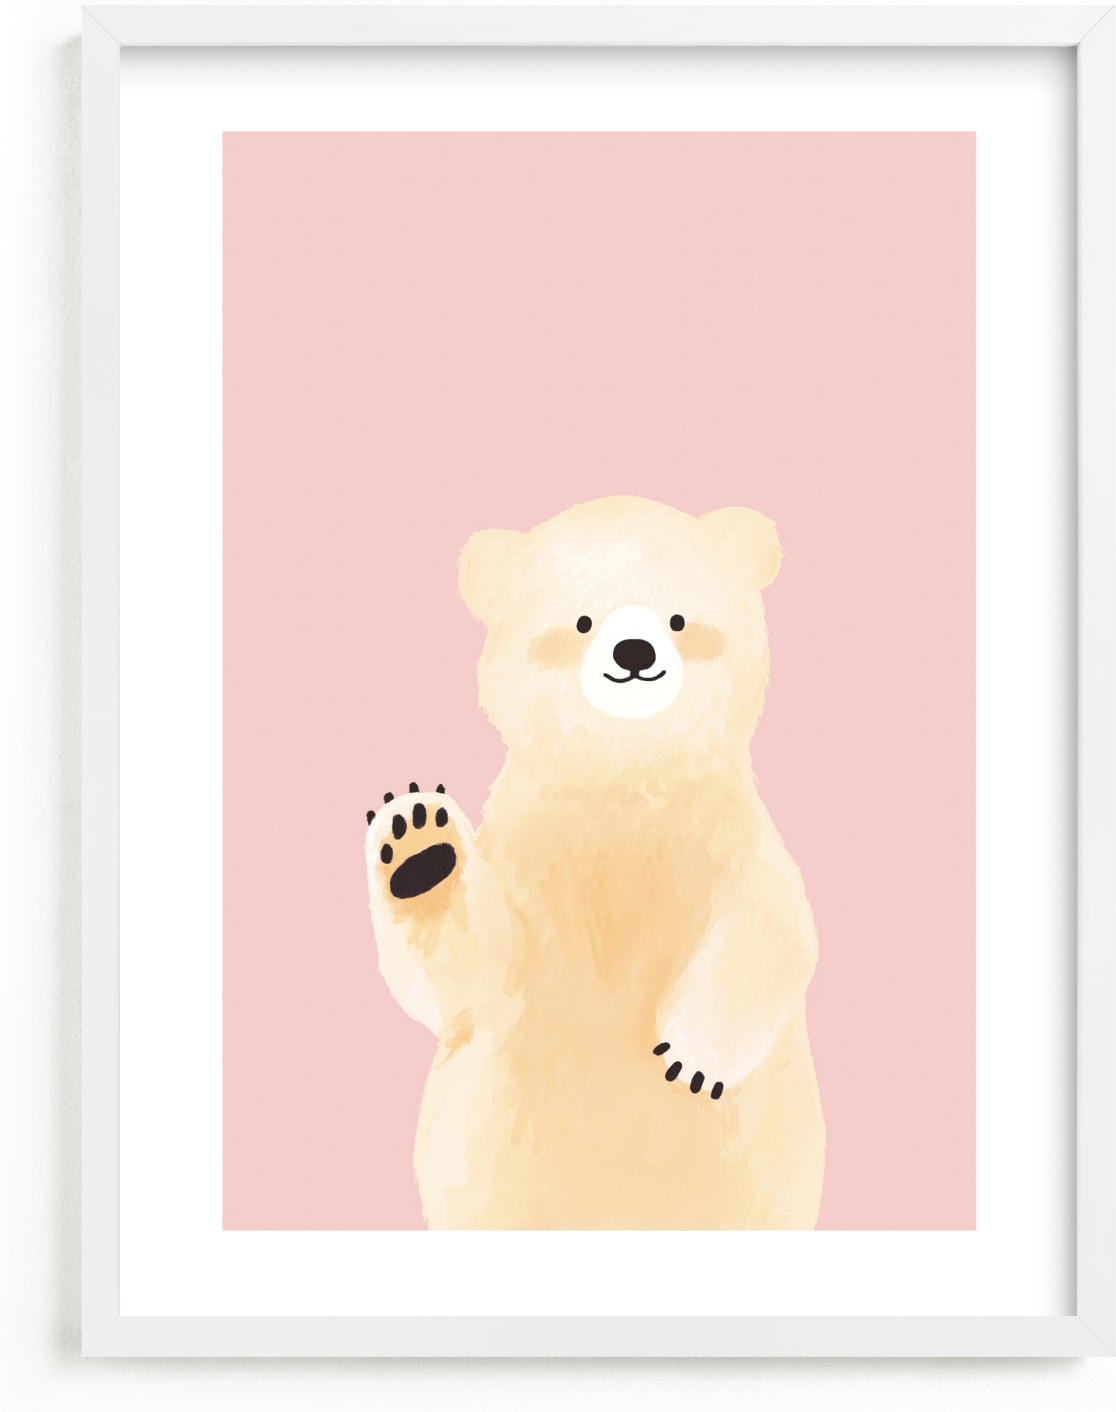 This is a white nursery wall art by Mollie Bohannon called So Beary Sweet.